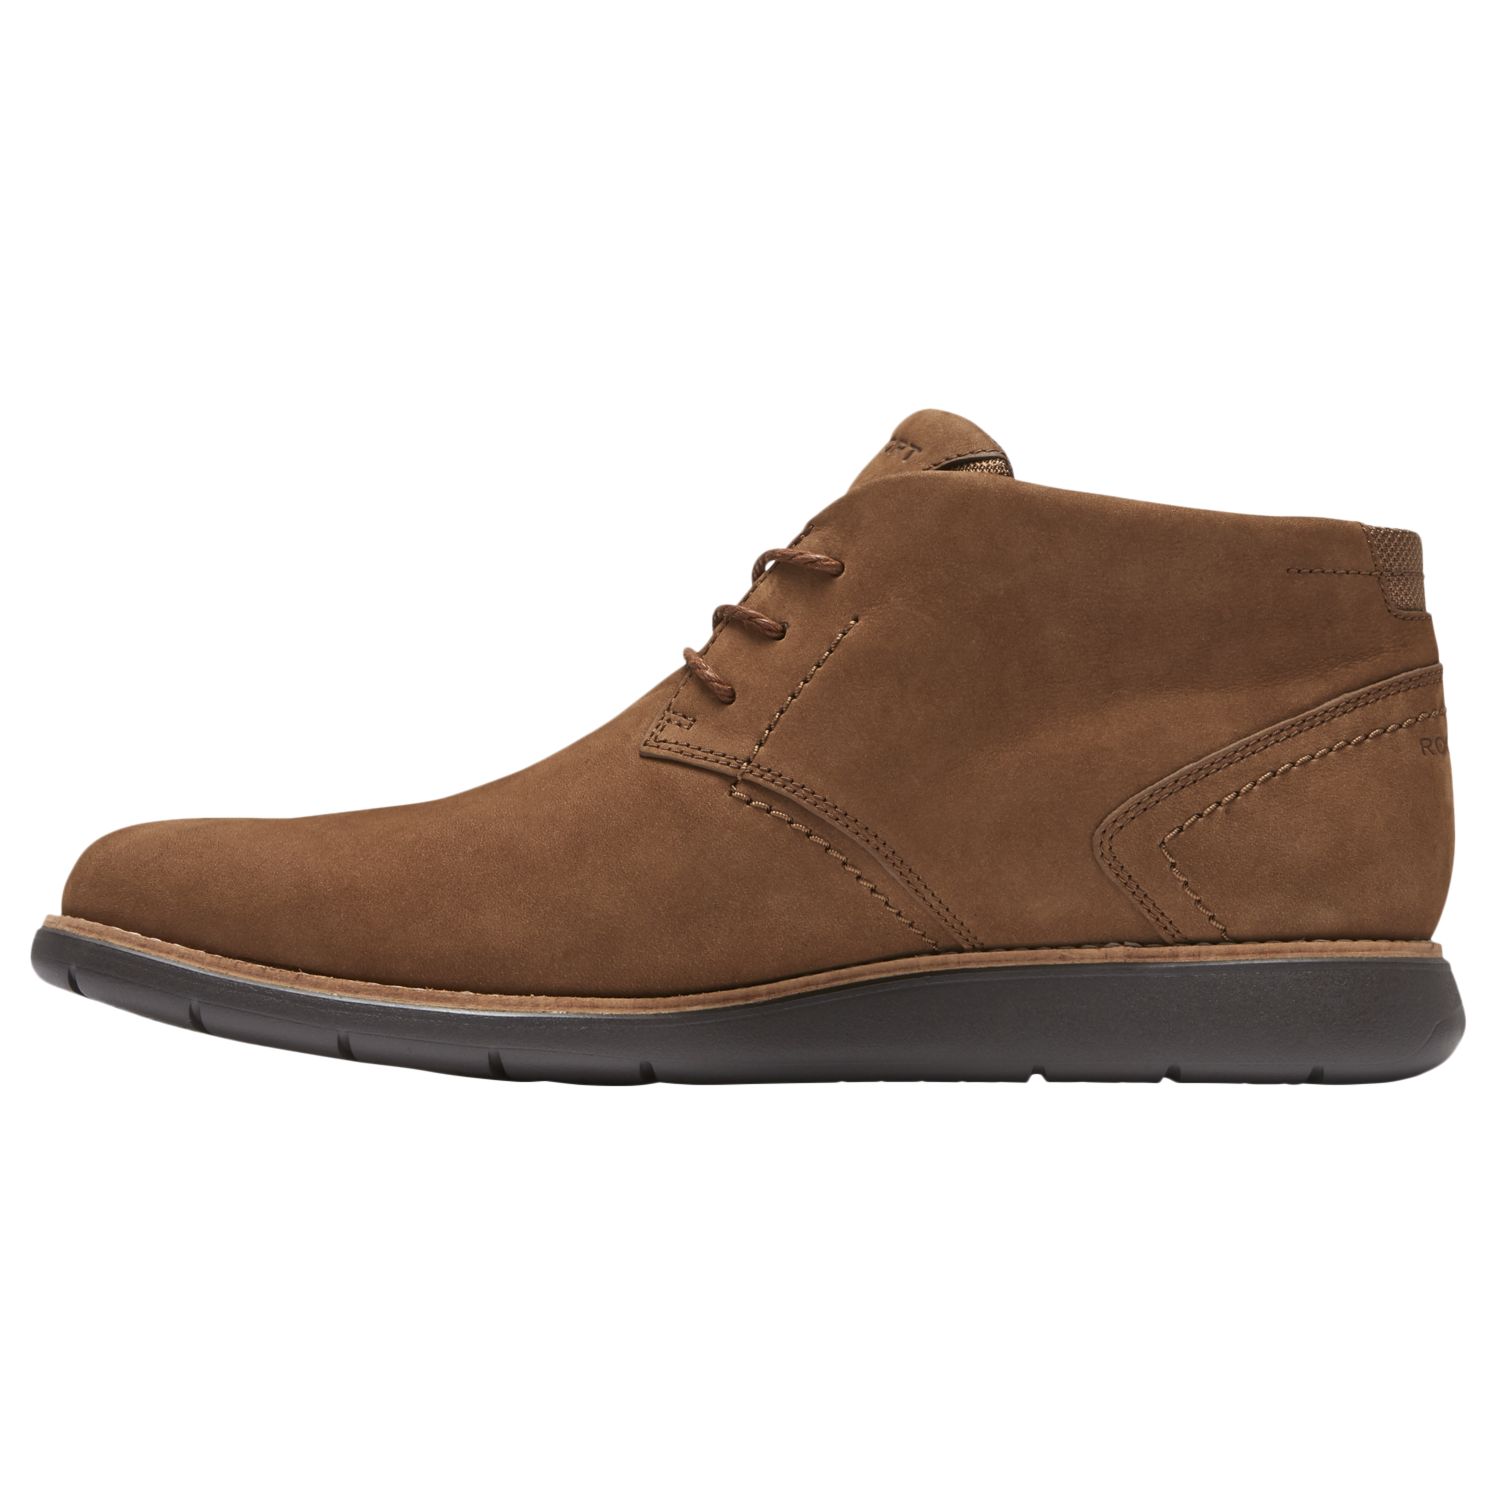 Rockport Total Motion Sports Chukka Boots, Brown at John Lewis & Partners